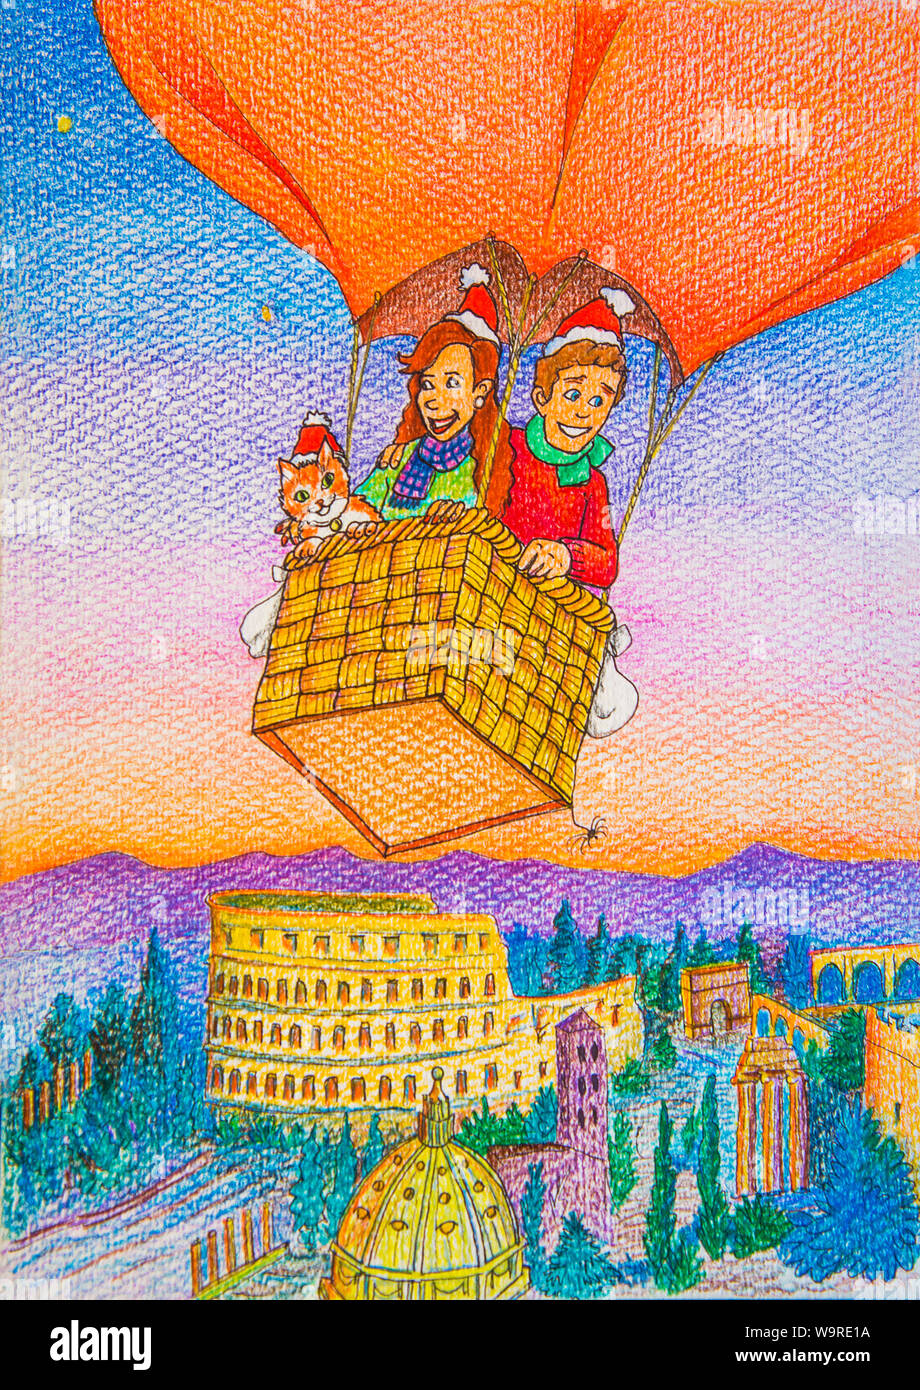 Couple and their cat ballooning over Rome. Illustration. Stock Photo